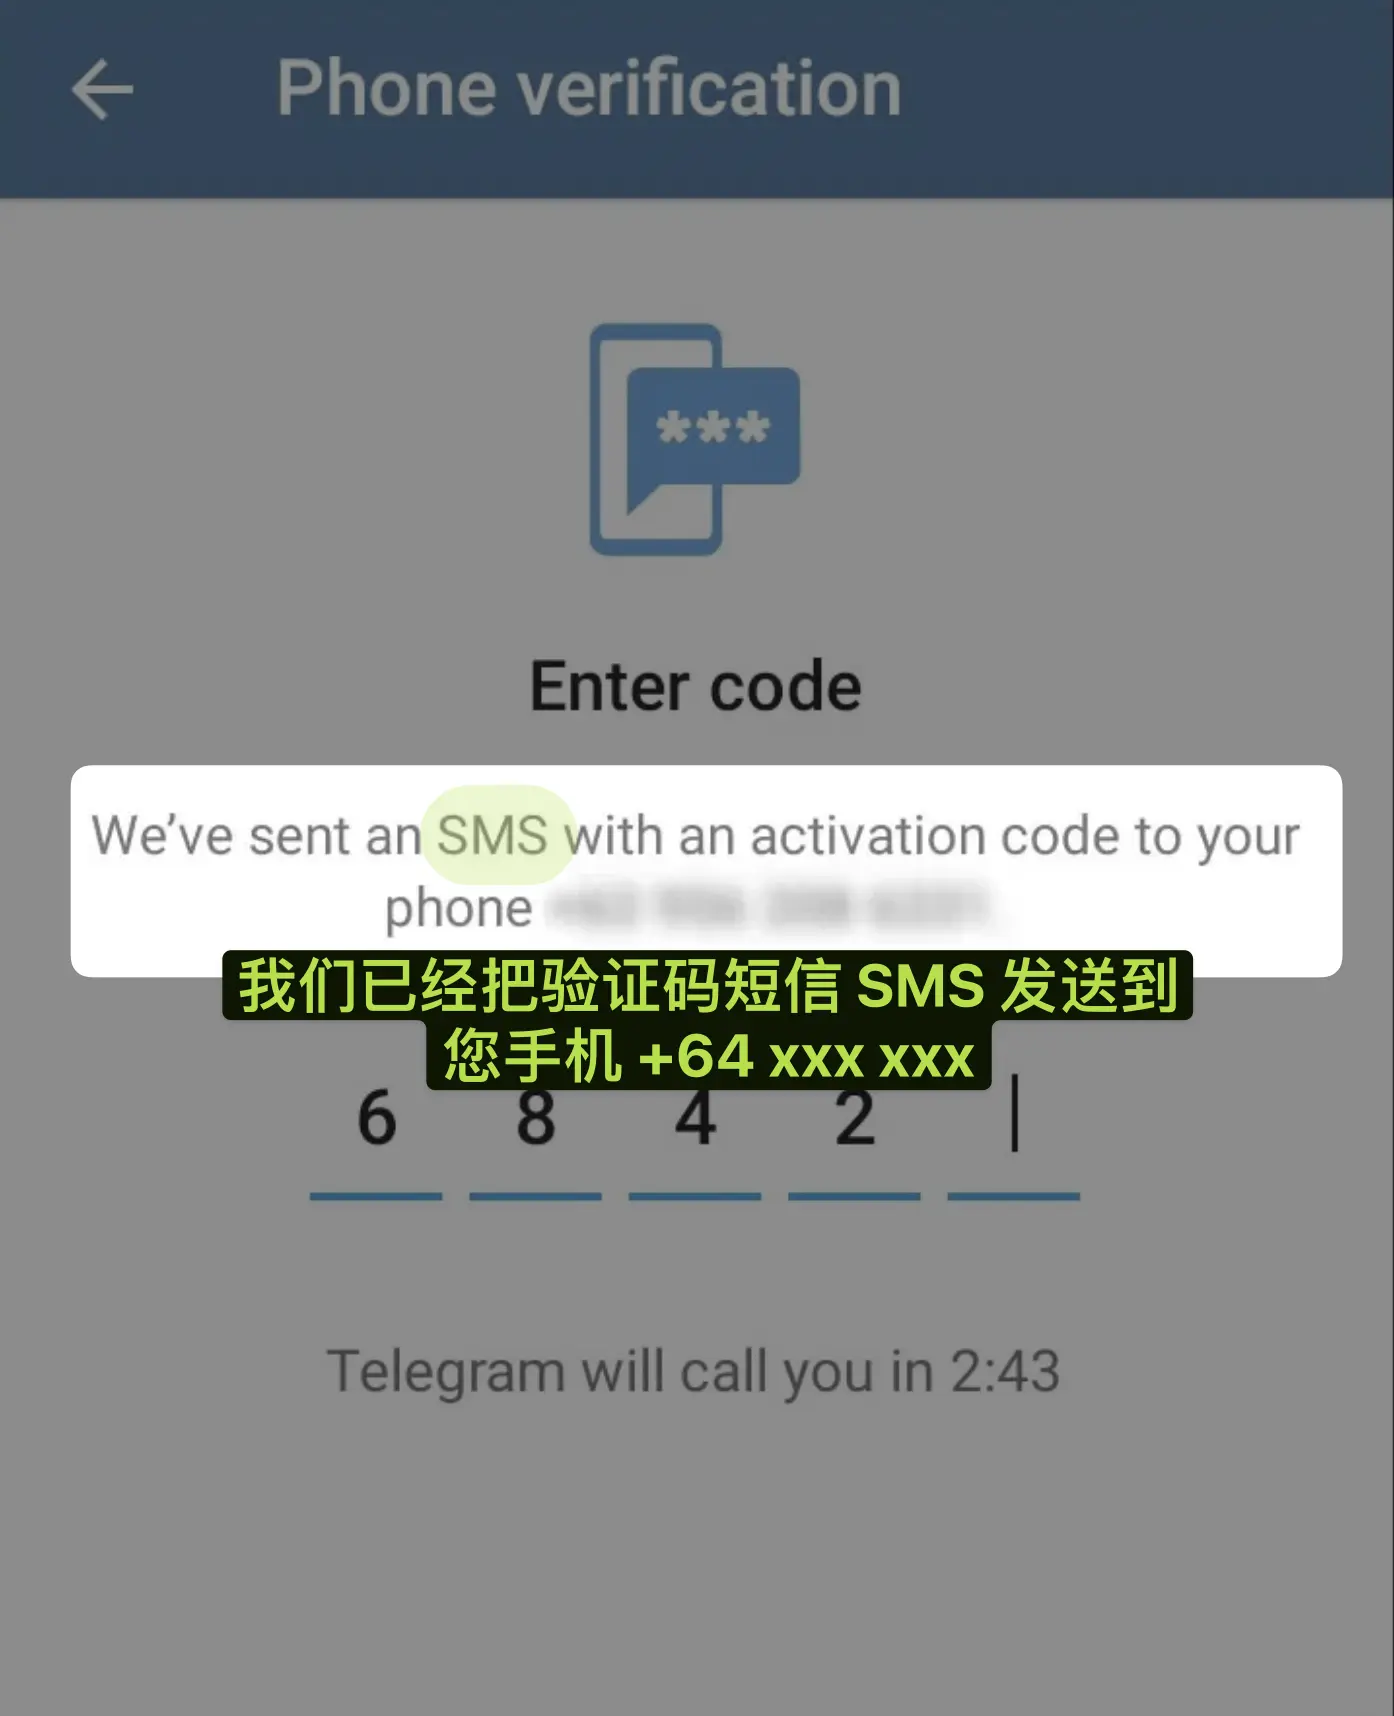 We've sent an SMS with an activation code to your phone +64 xxx xxx